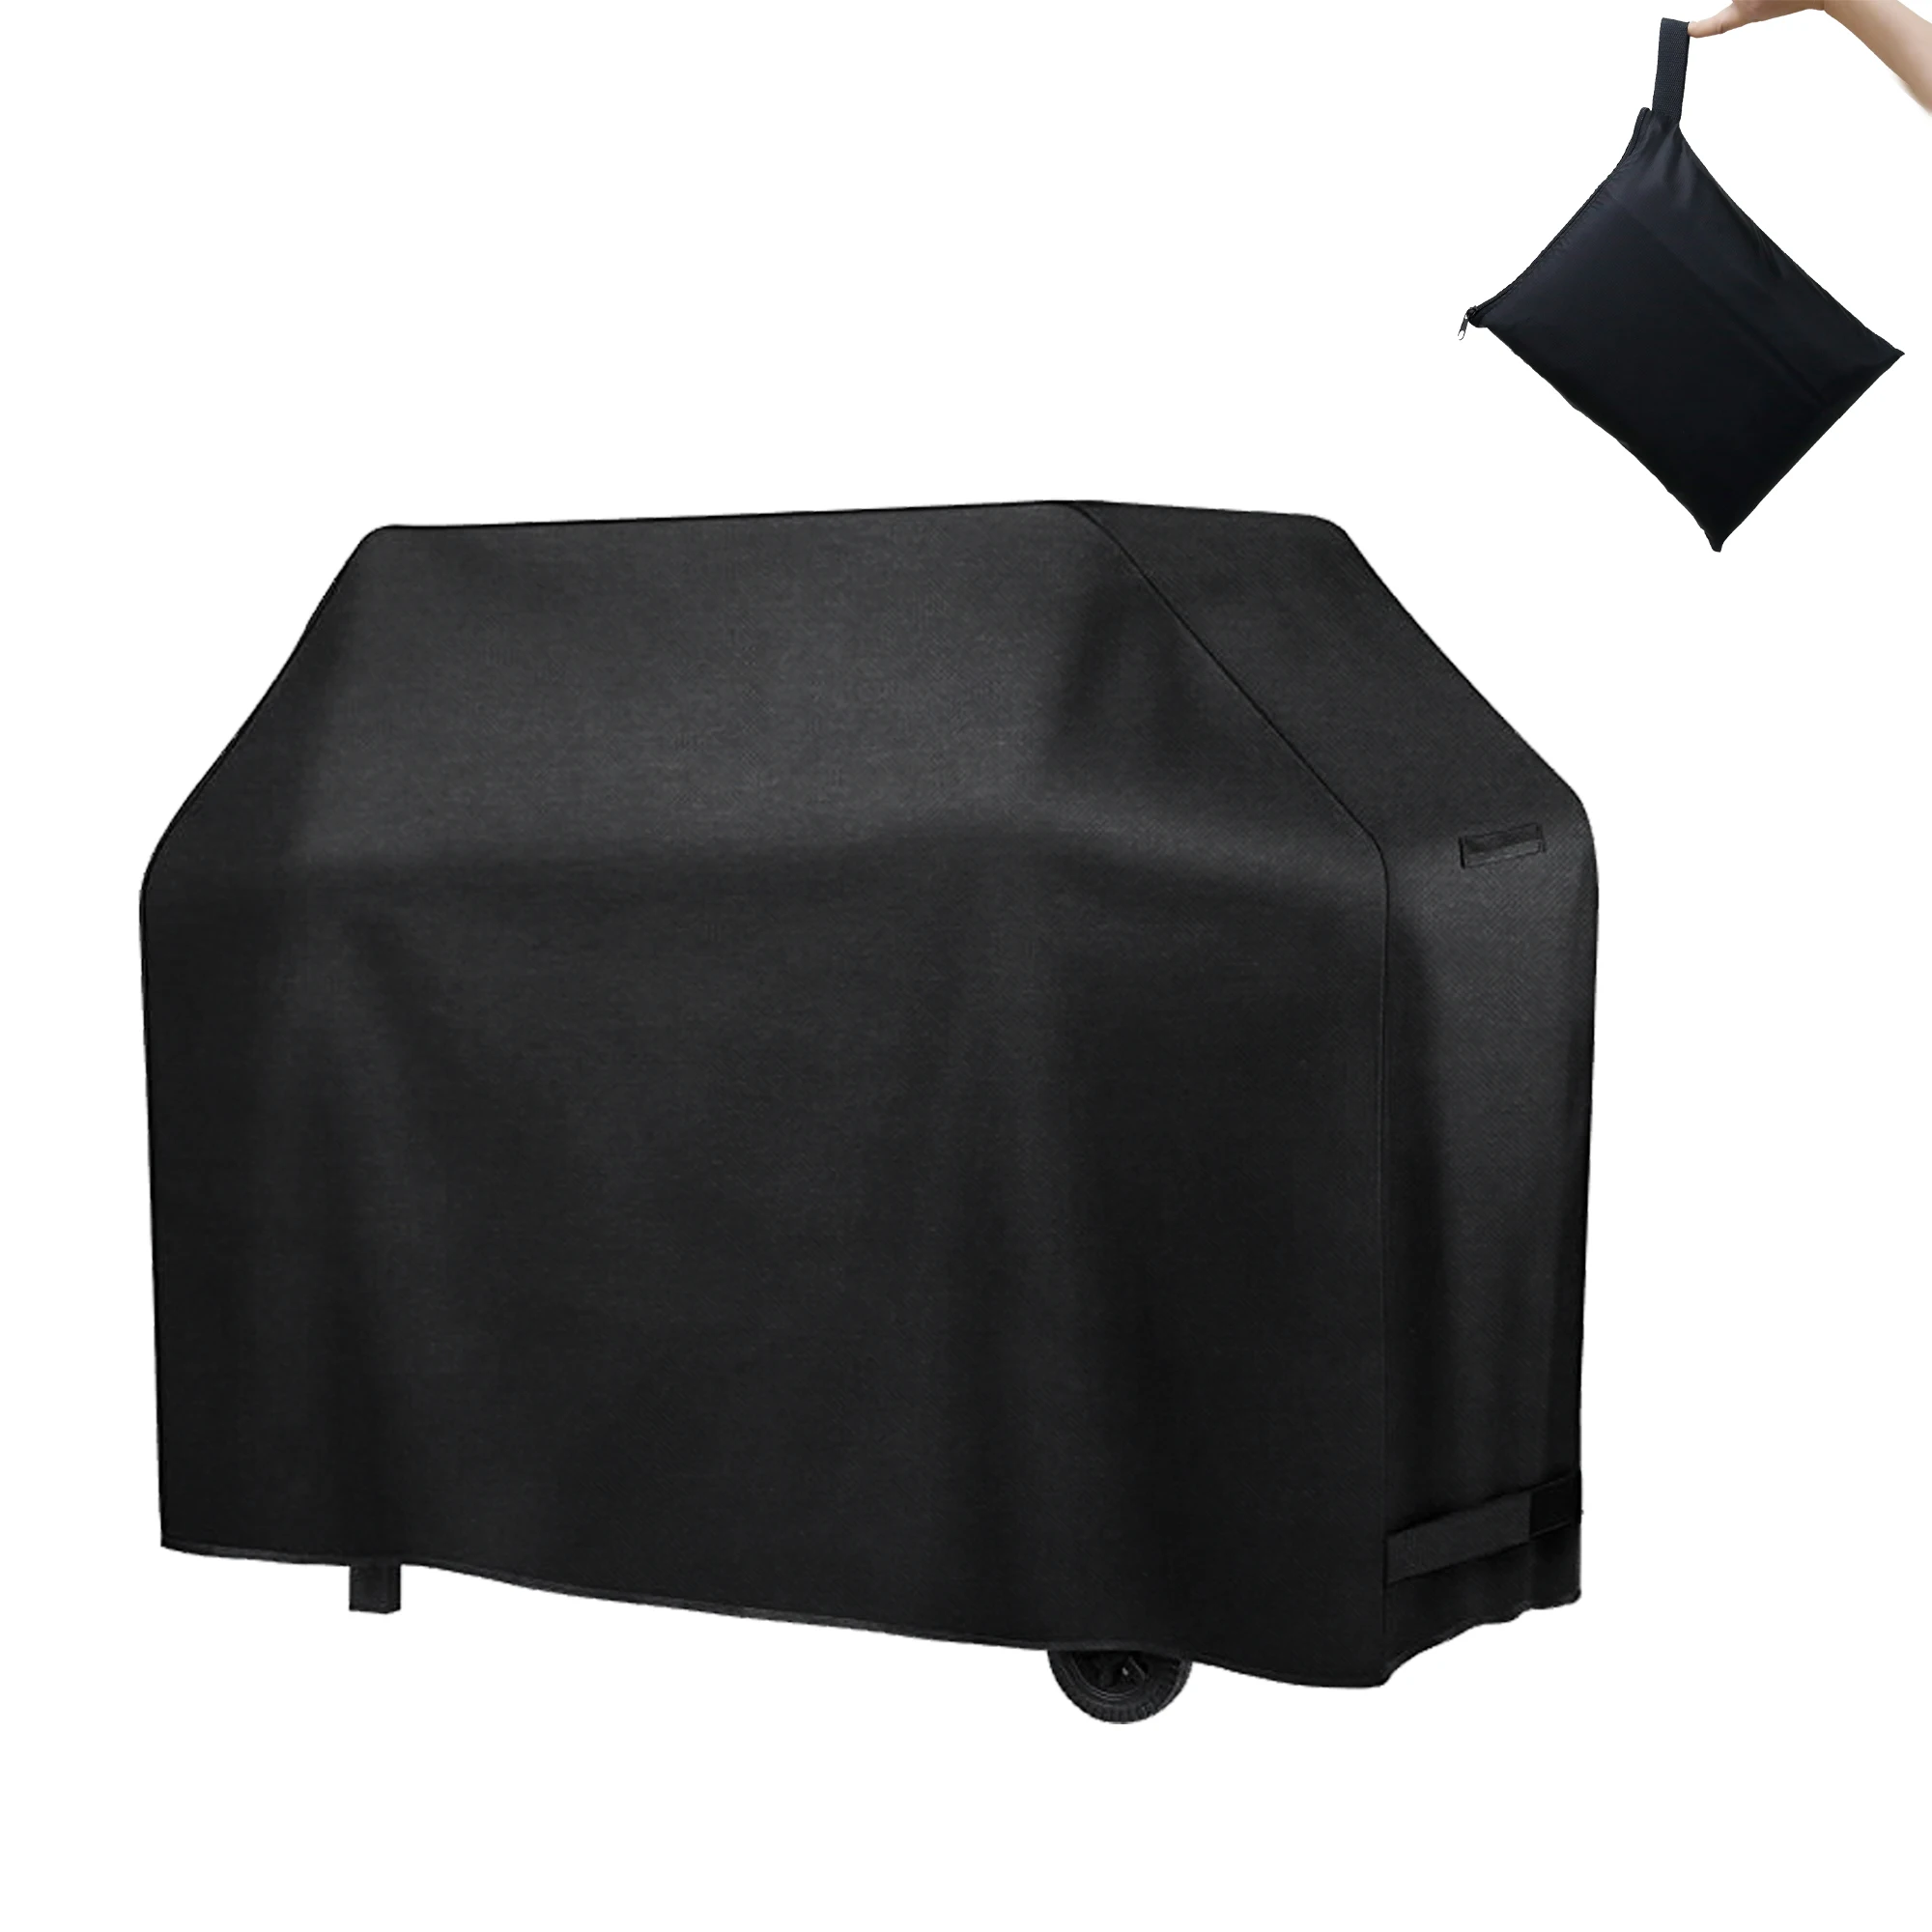 

Waterproof BBQ Cover Outdoor Barbeque Heavy Duty Grill Cover 600D Oxford Gas BBQ Cover Fade and Rip Resistant For Weber Grill